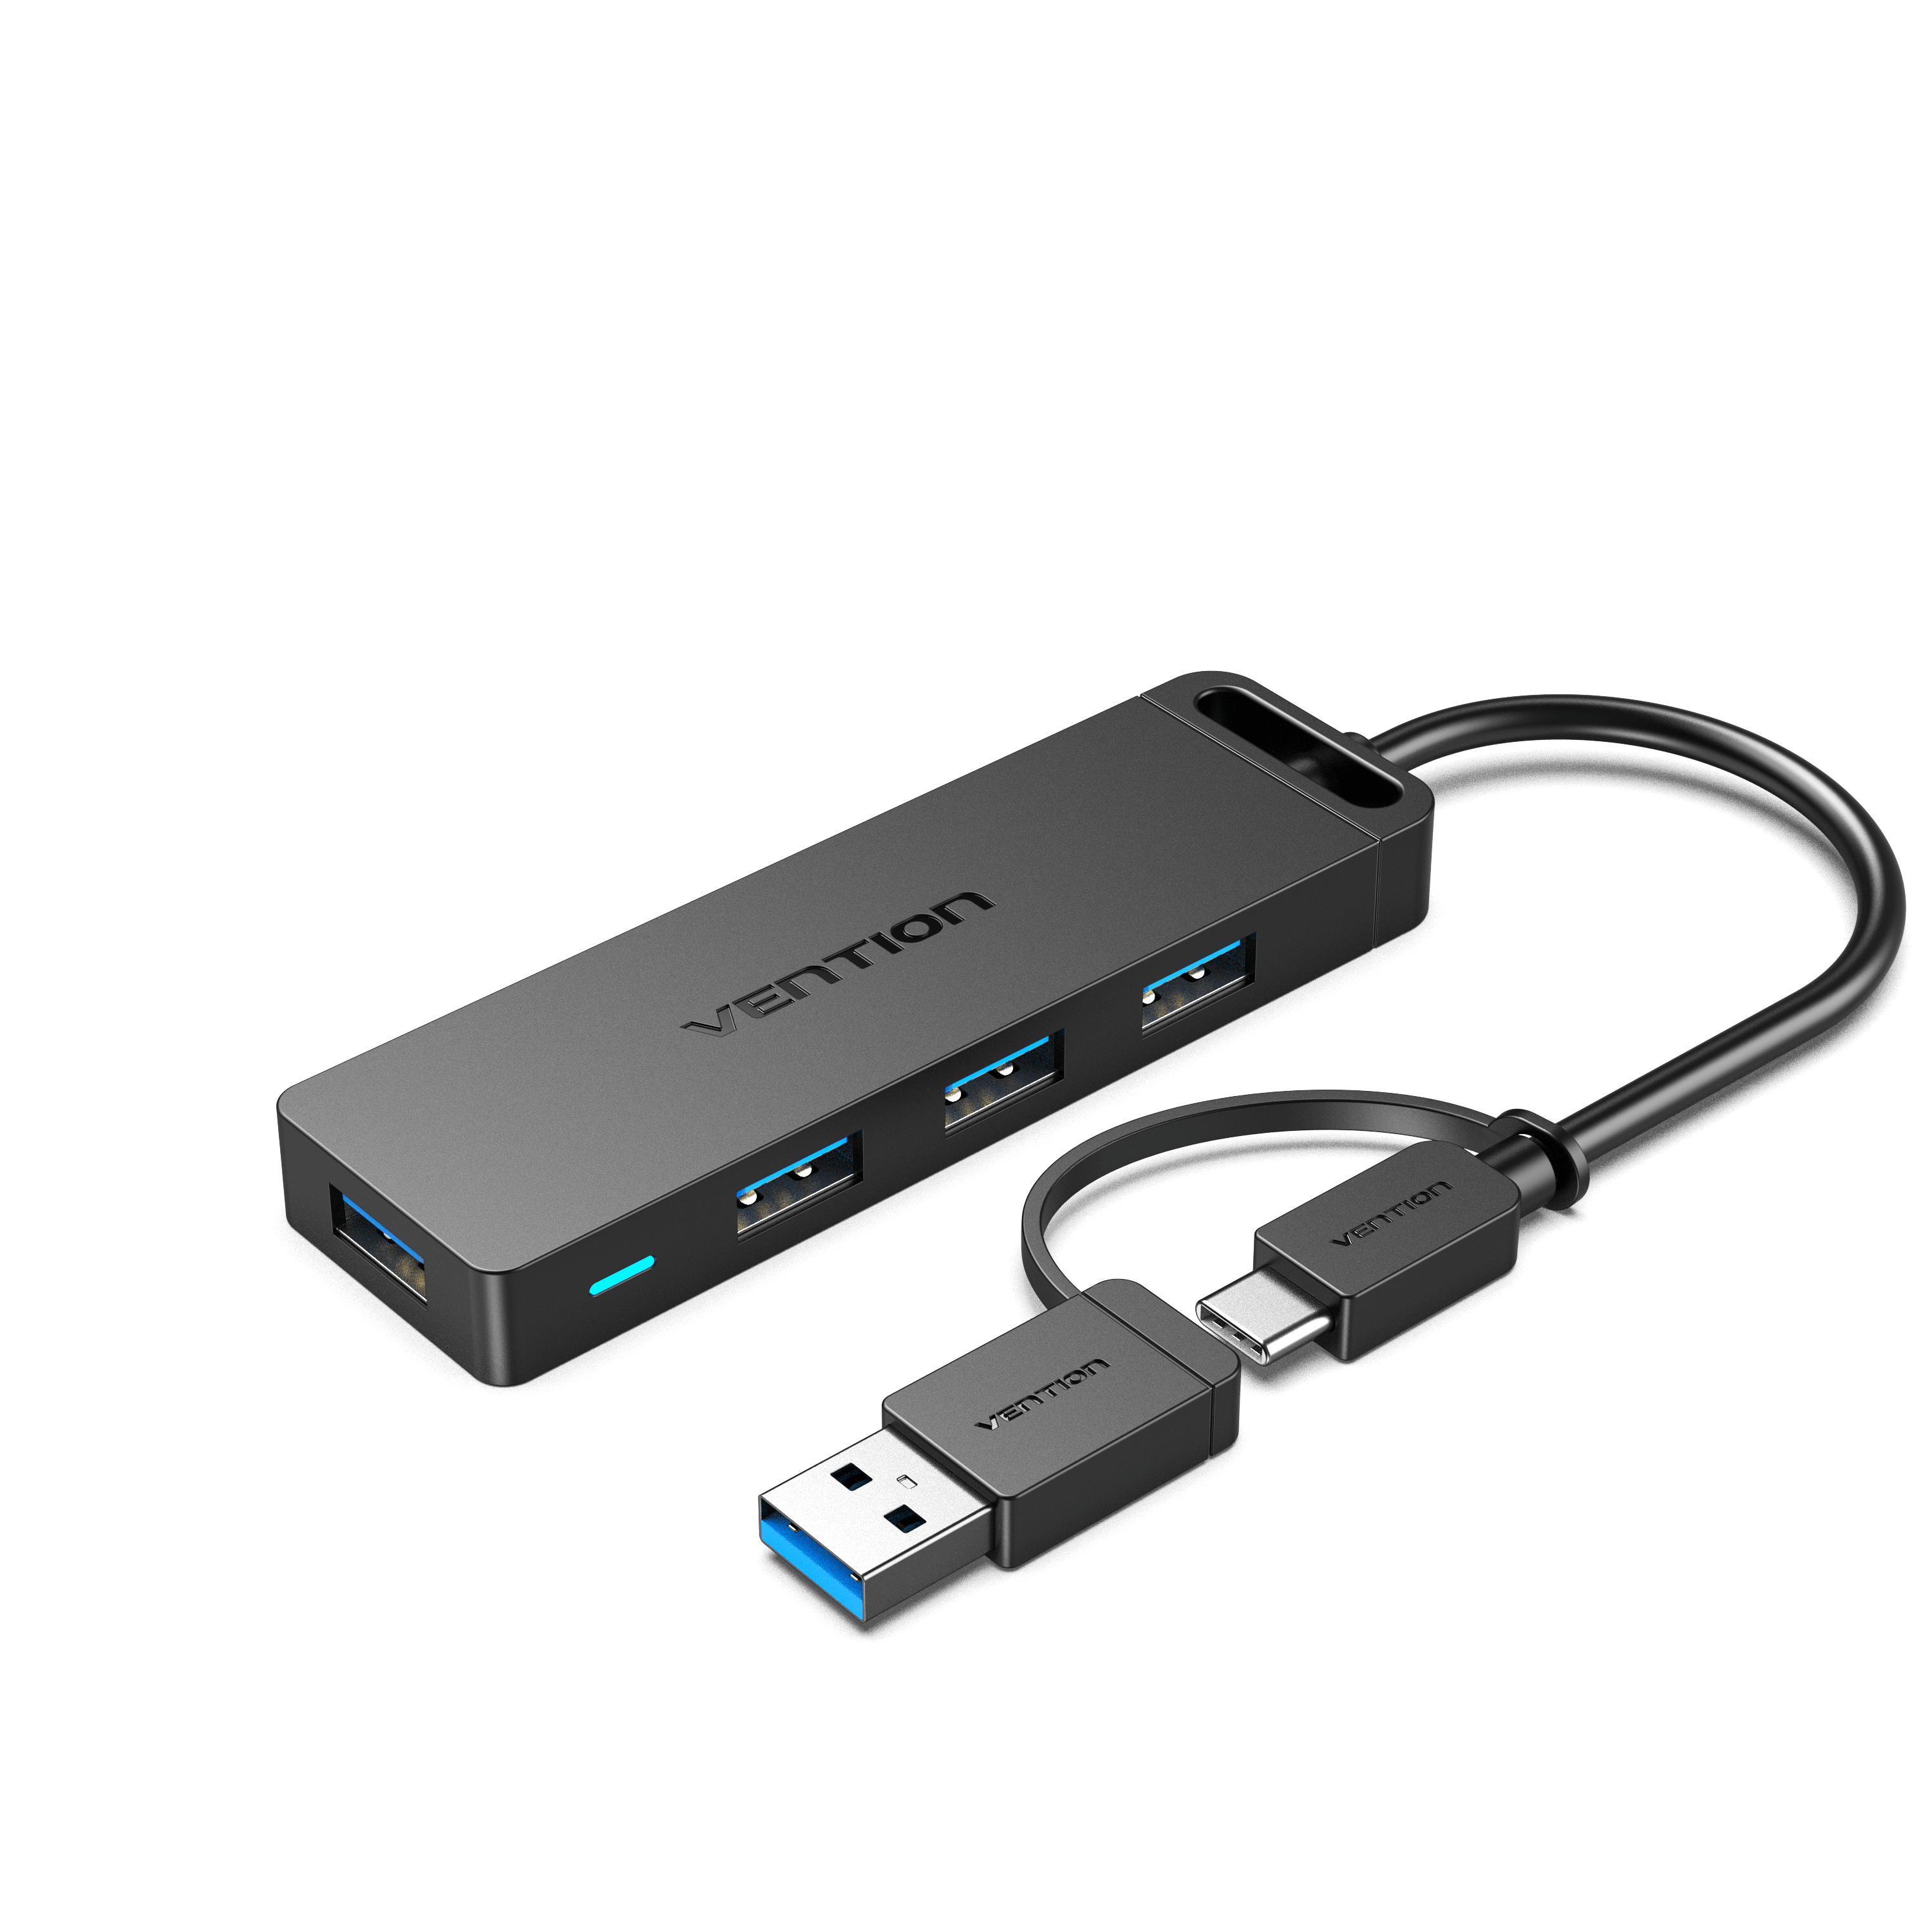 Usb 3.0 3 Port Hub Data Hub For Pc And Other Usb 3.0 Compliant